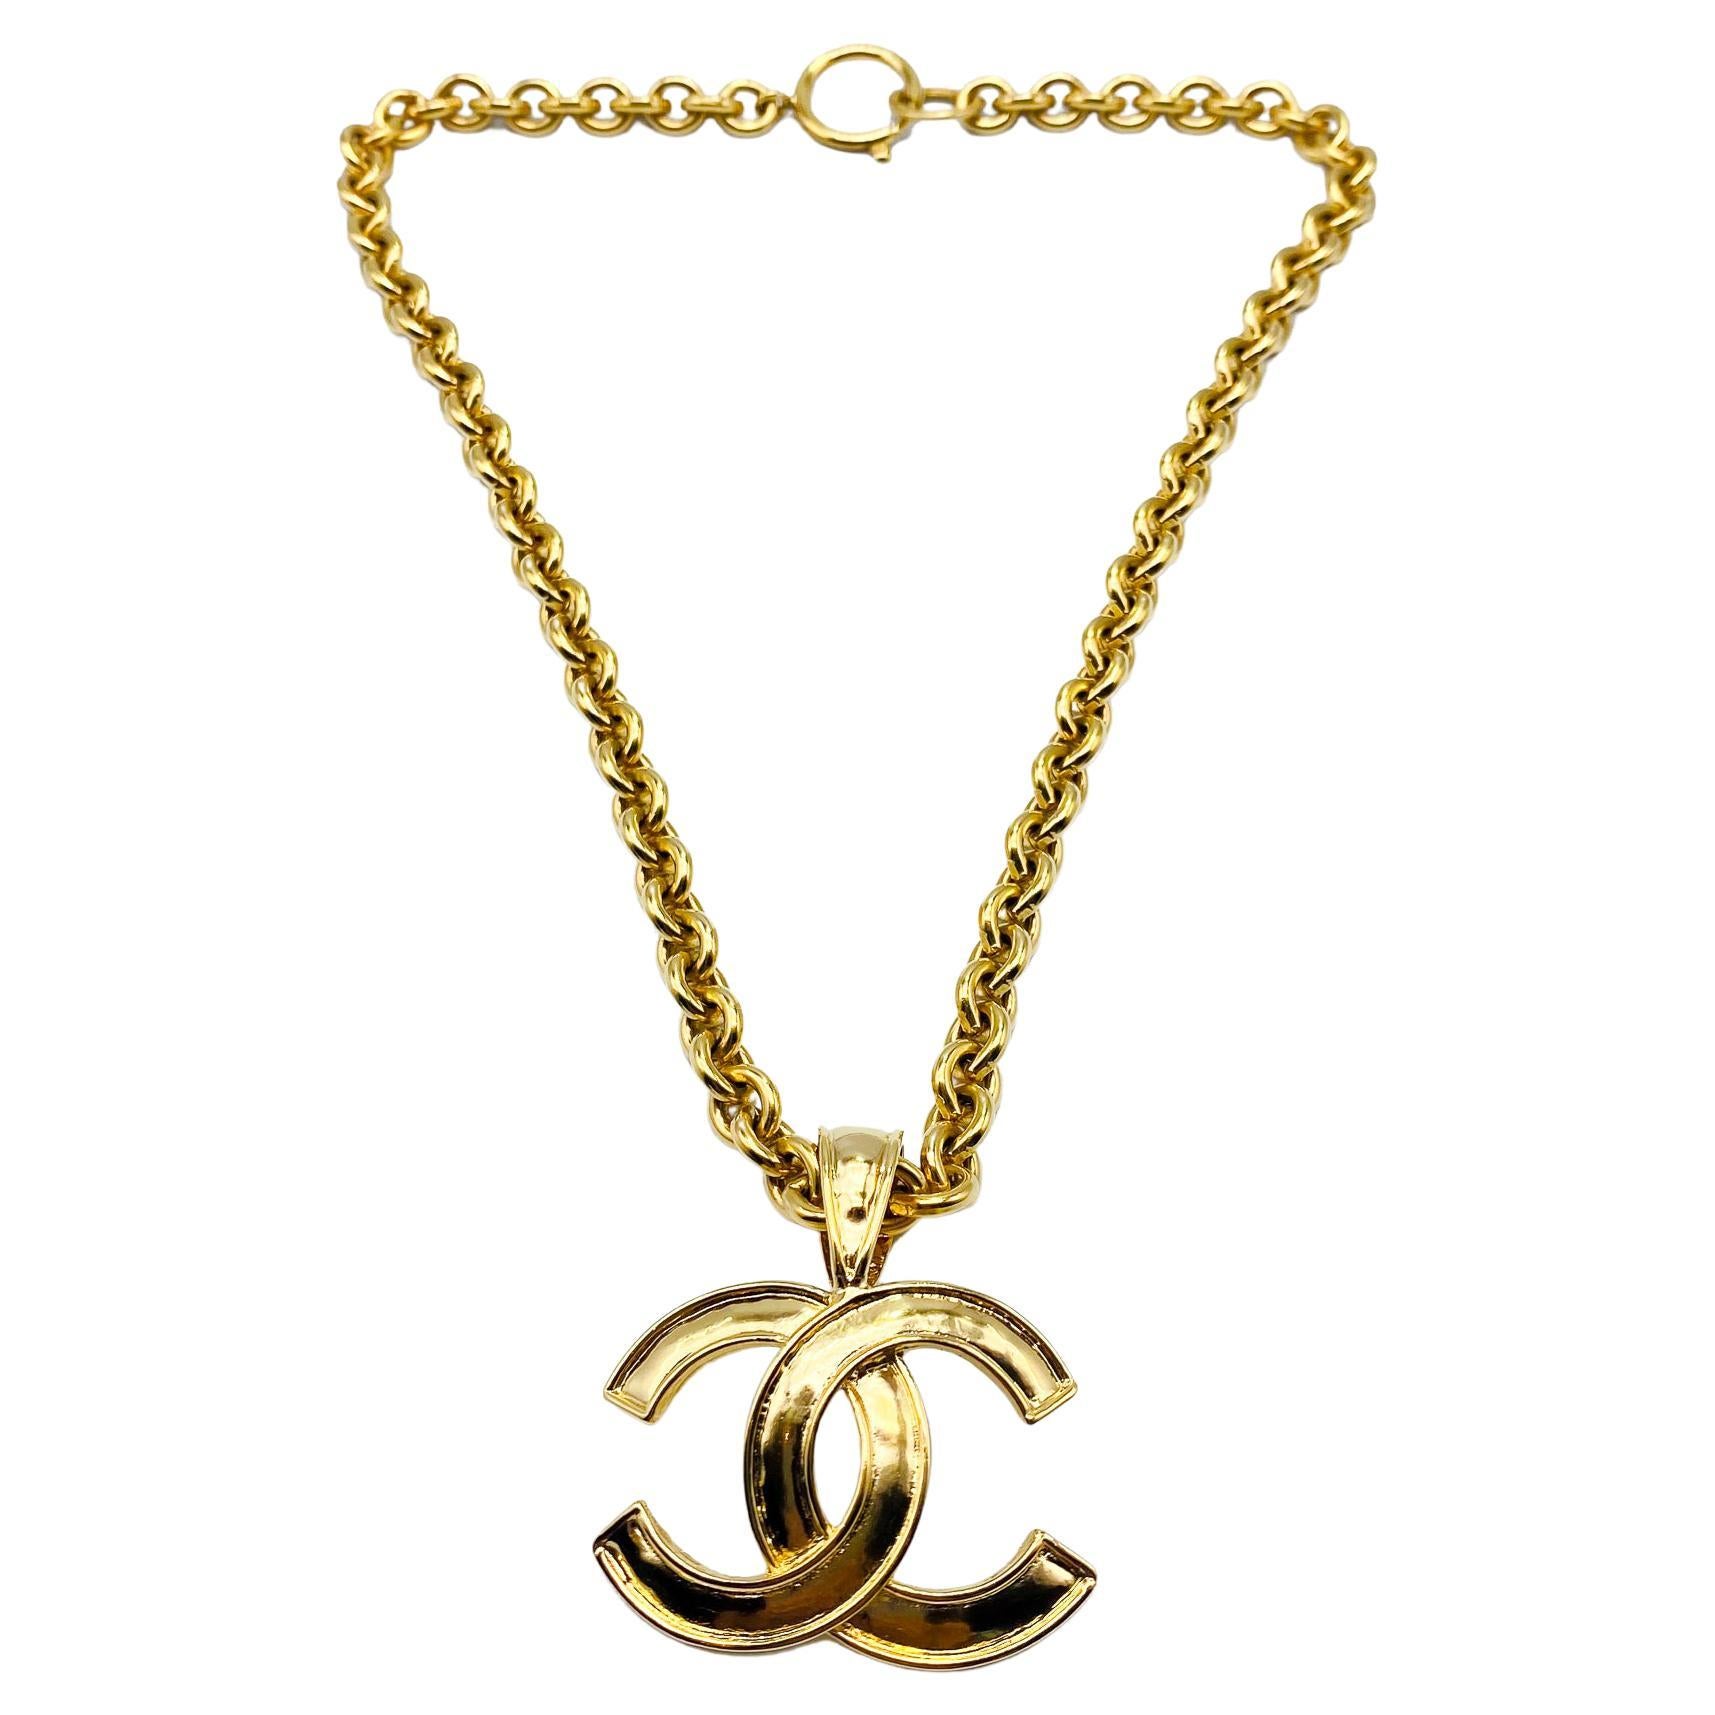 Vintage Chanel Necklace 1990s - 1994 AW Collection